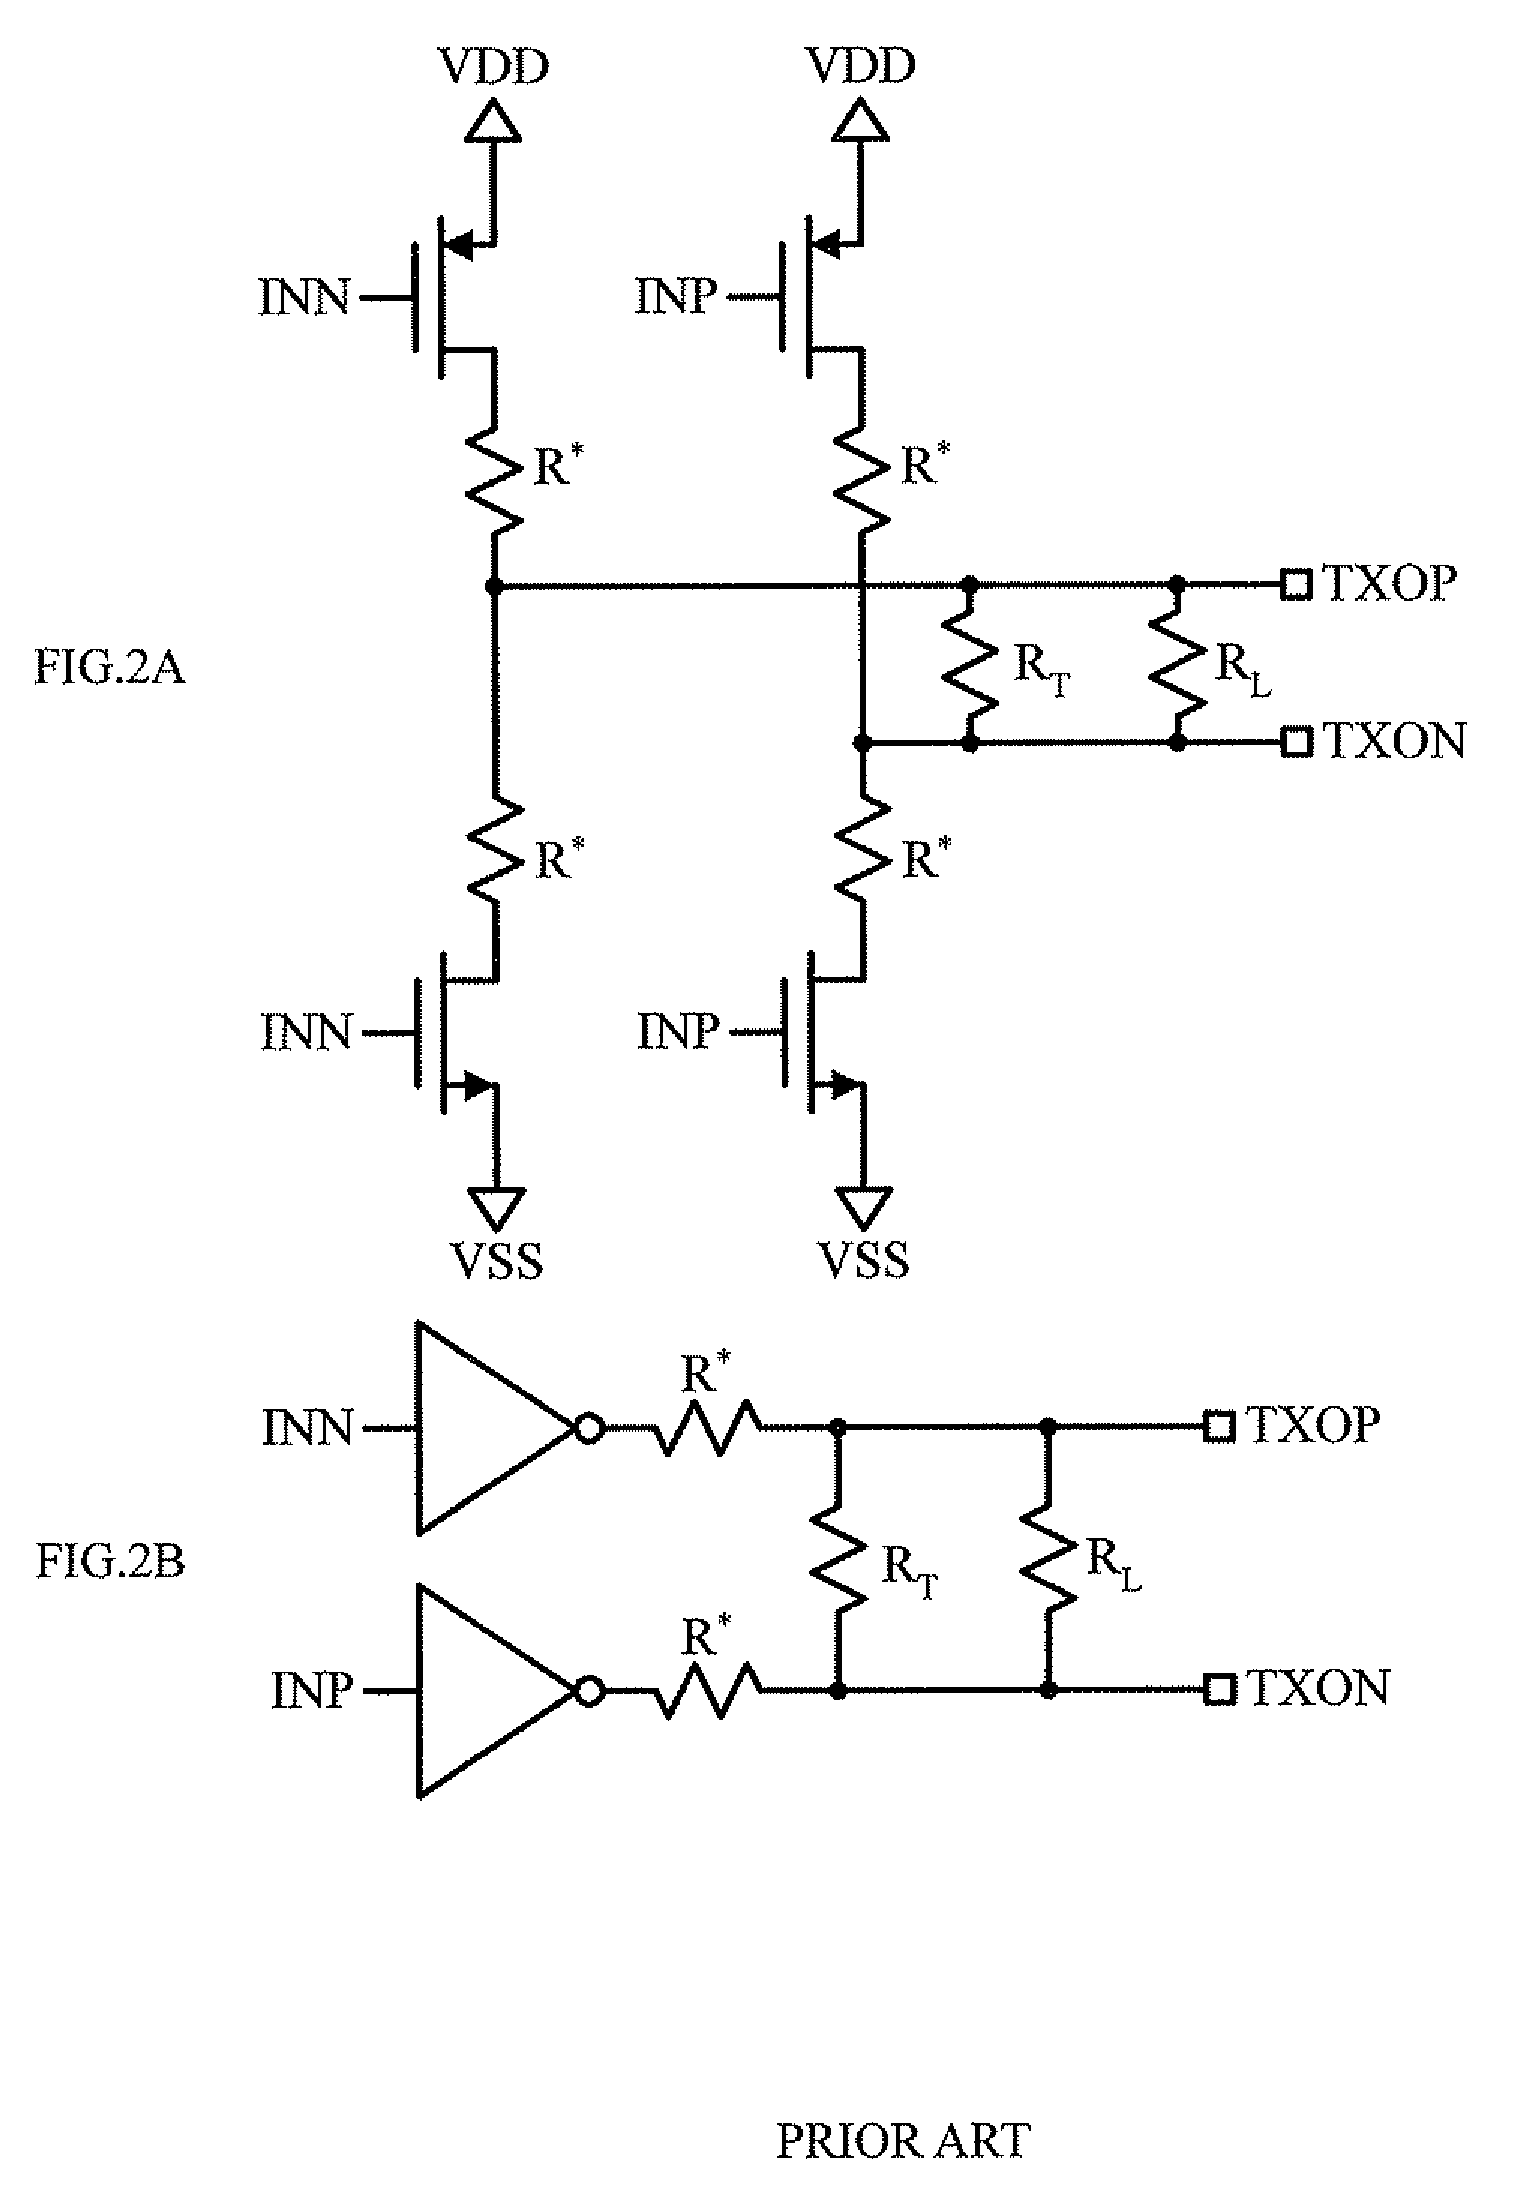 Configurable voltage mode transmitted architecture with common-mode adjustment and novel pre-emphasis